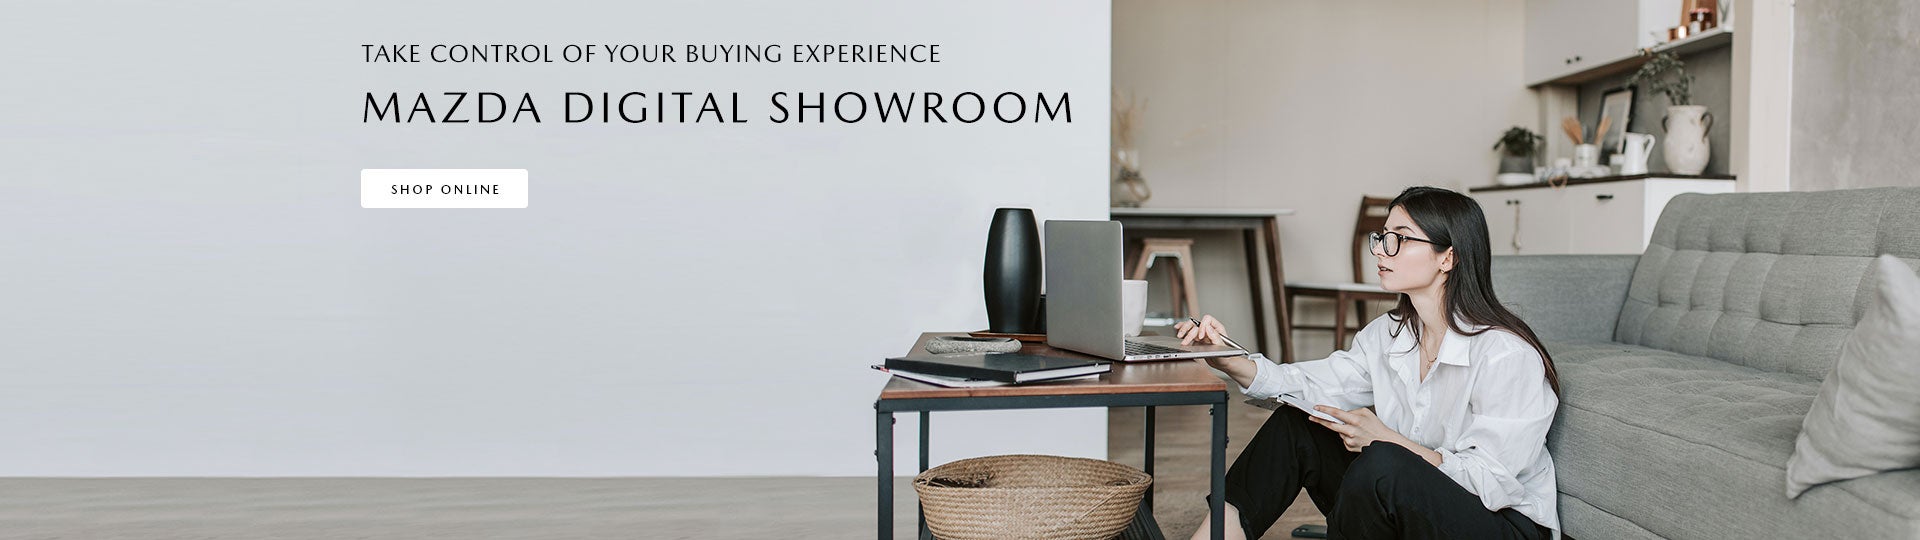 Mazda Digital Showroom: Control Your Buying Experience